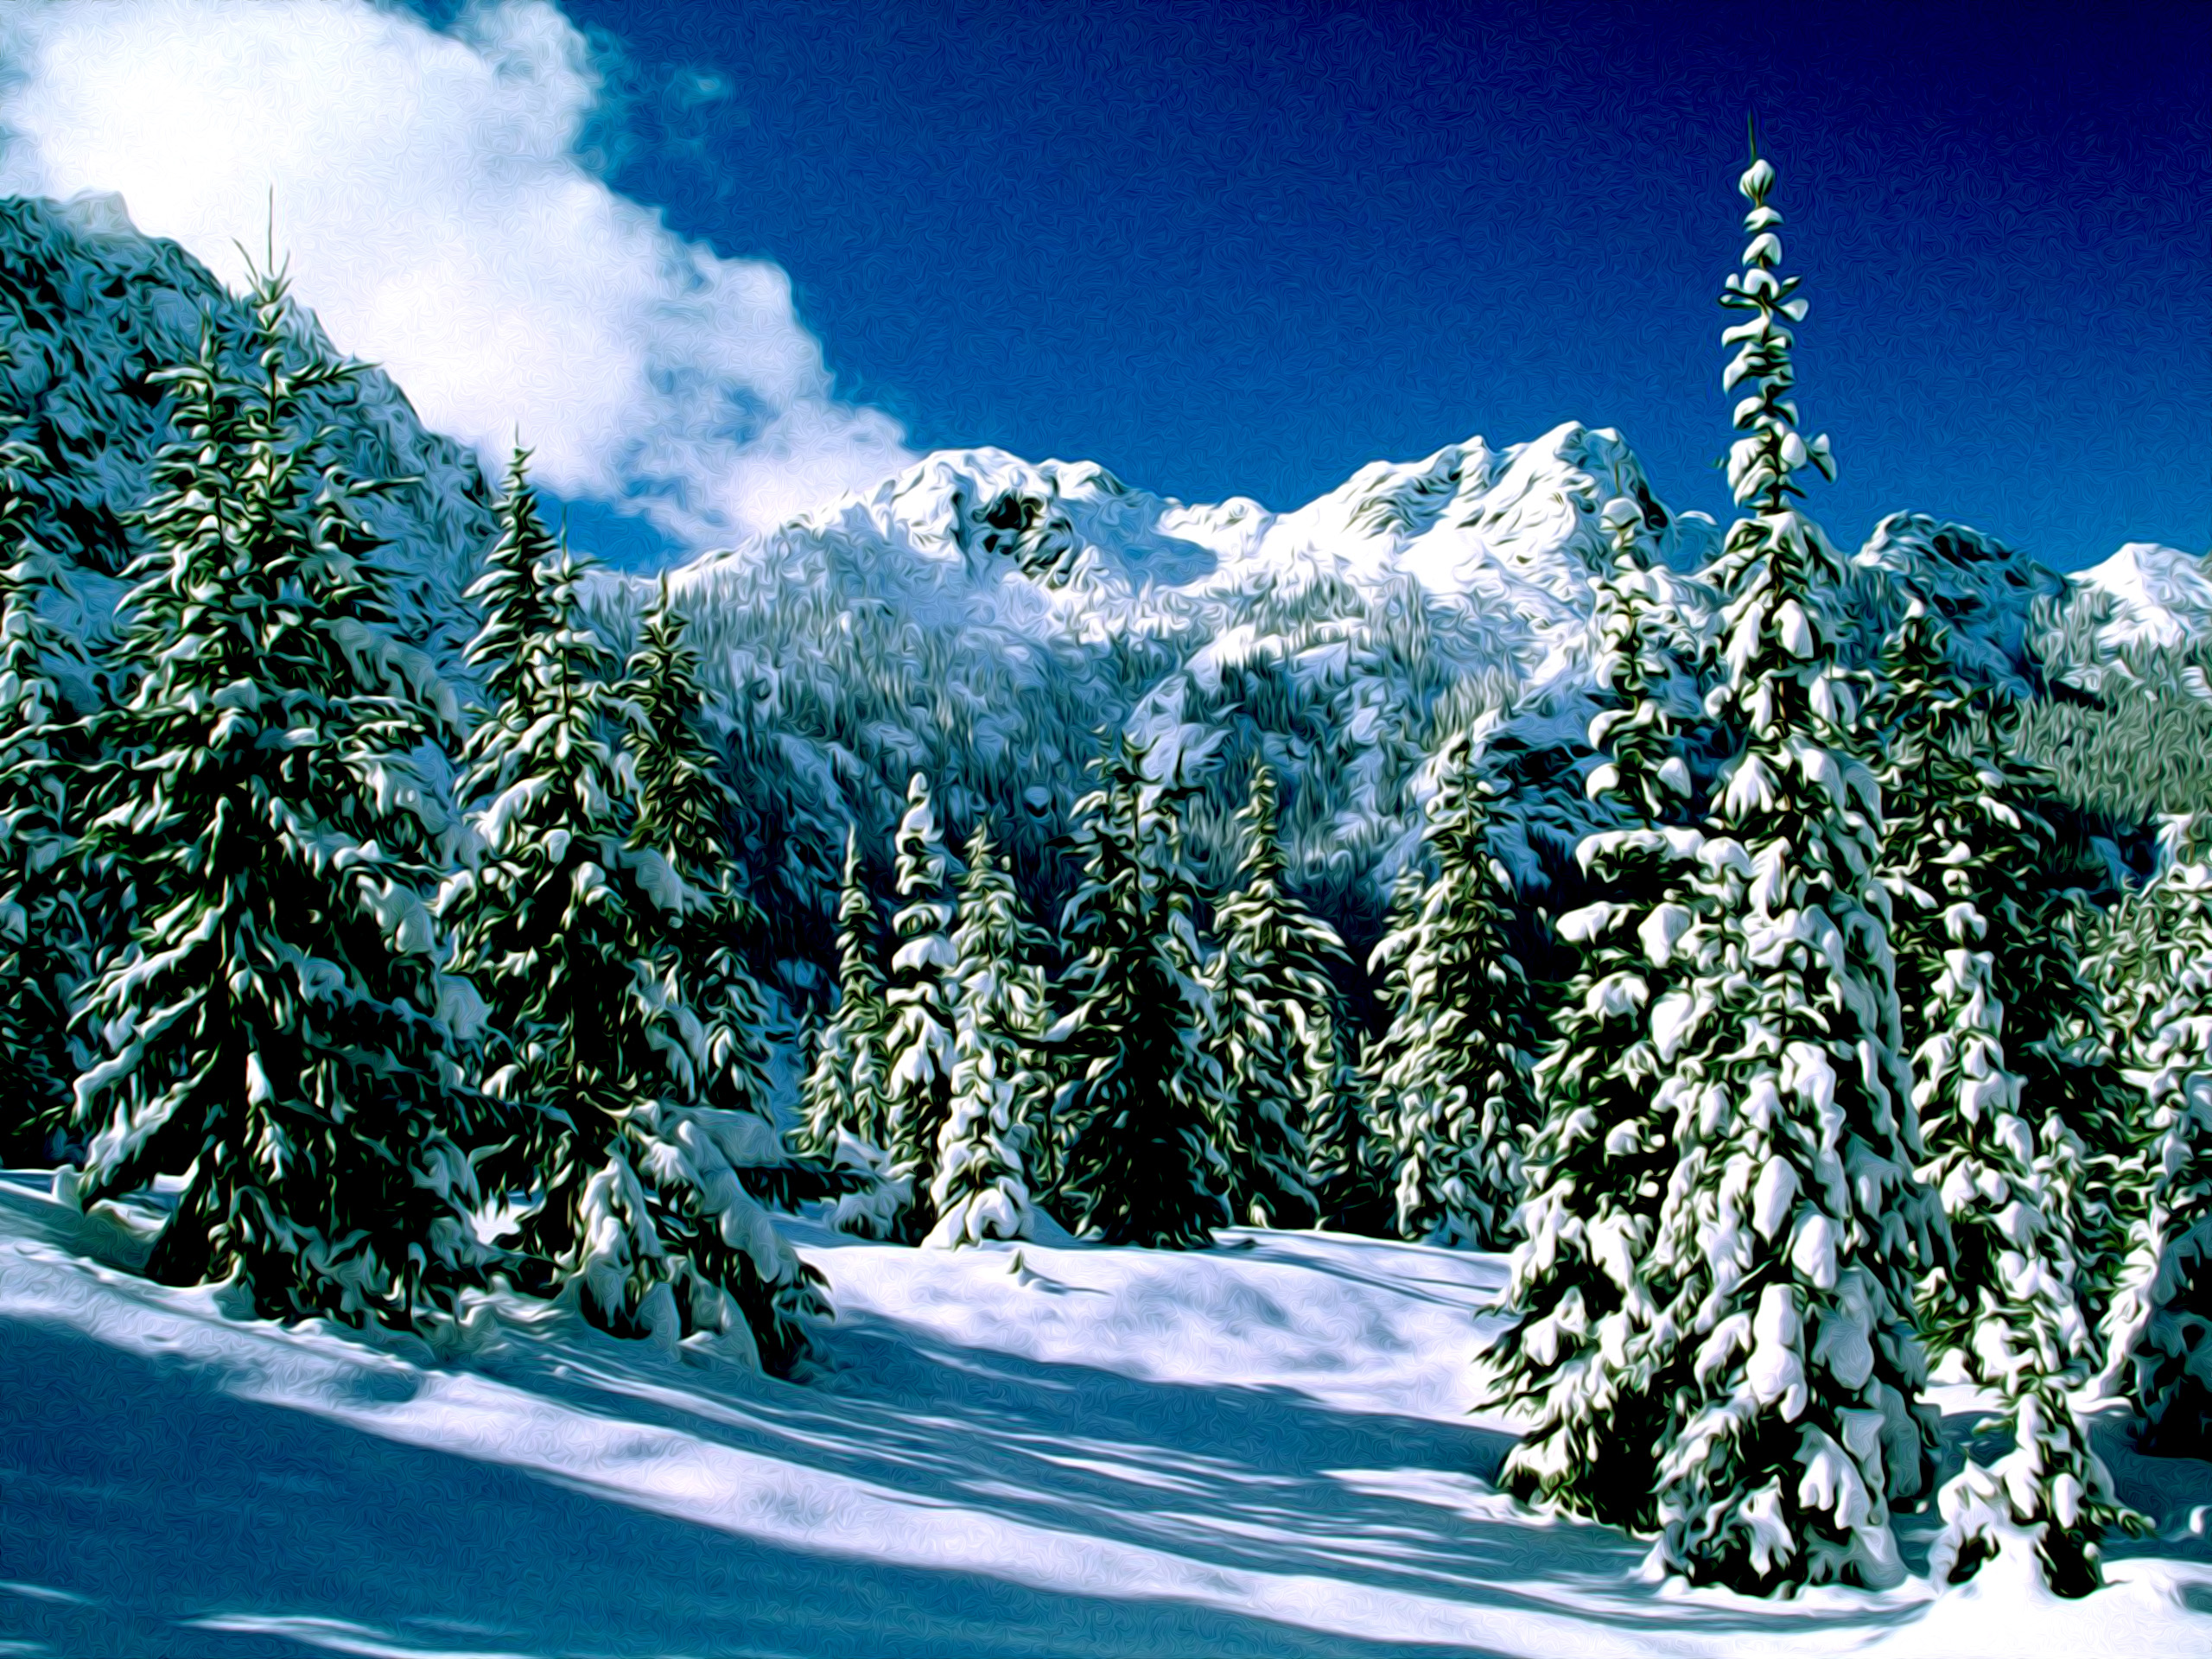 Winter TheWallpapers Free Desktop Wallpapers for HD Widescreen and